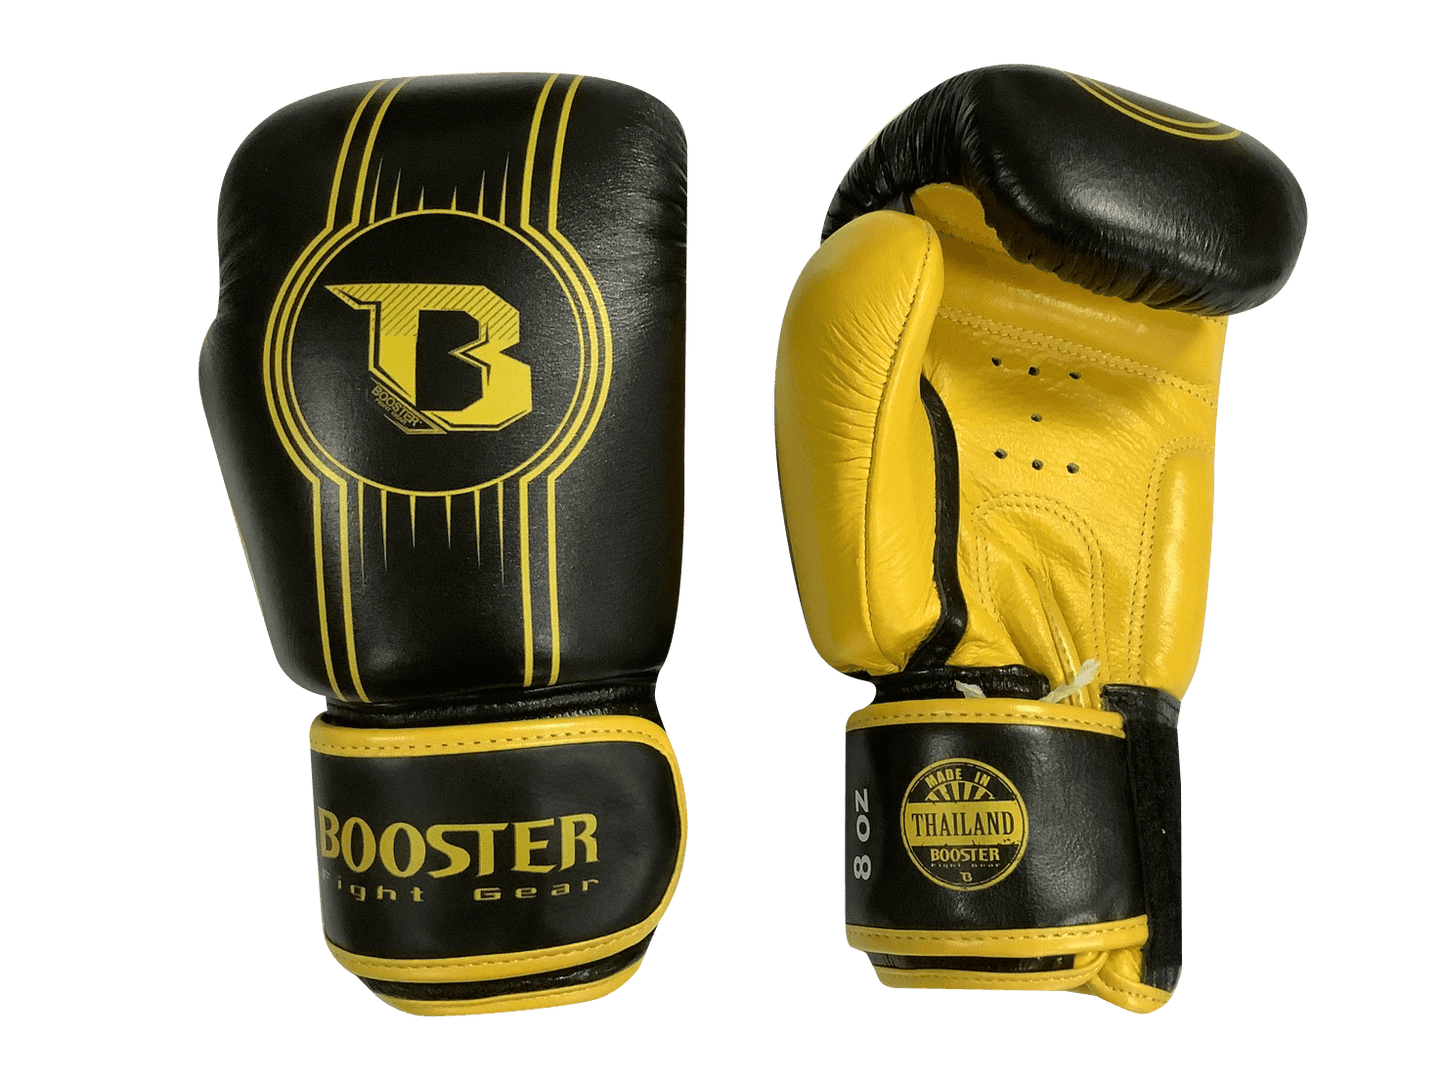 Booster Boxing Gloves BGLV6 Yellow Black